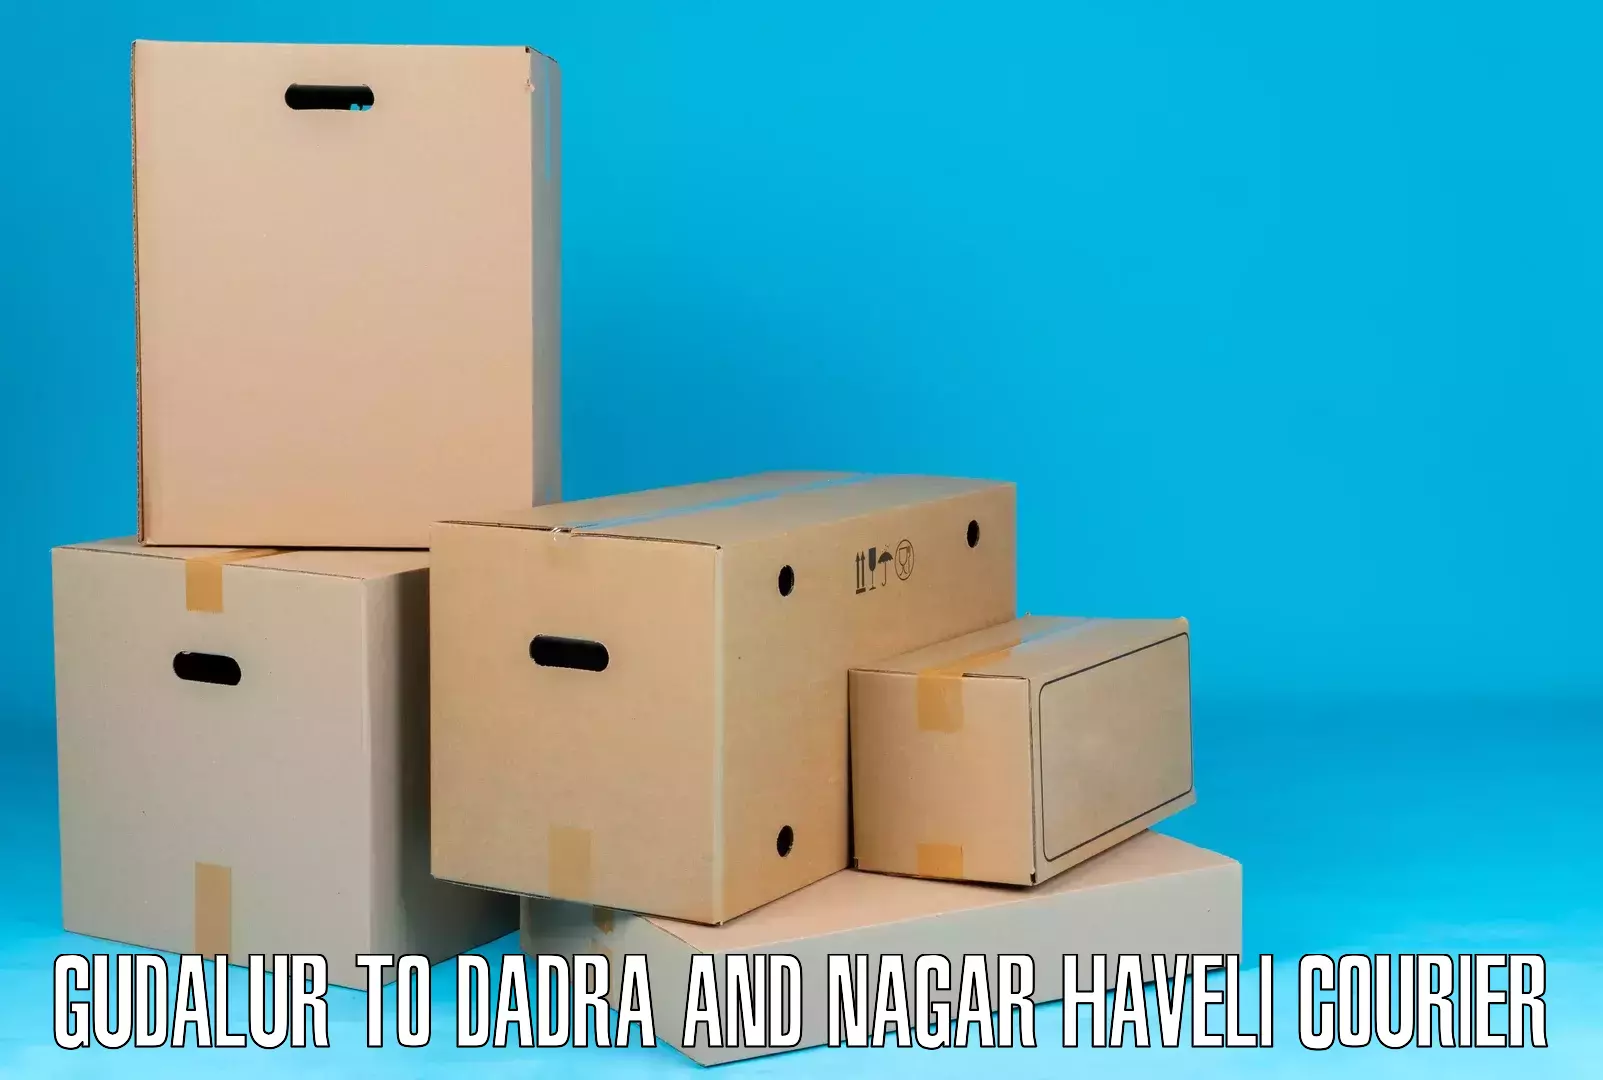 State-of-the-art courier technology Gudalur to Dadra and Nagar Haveli